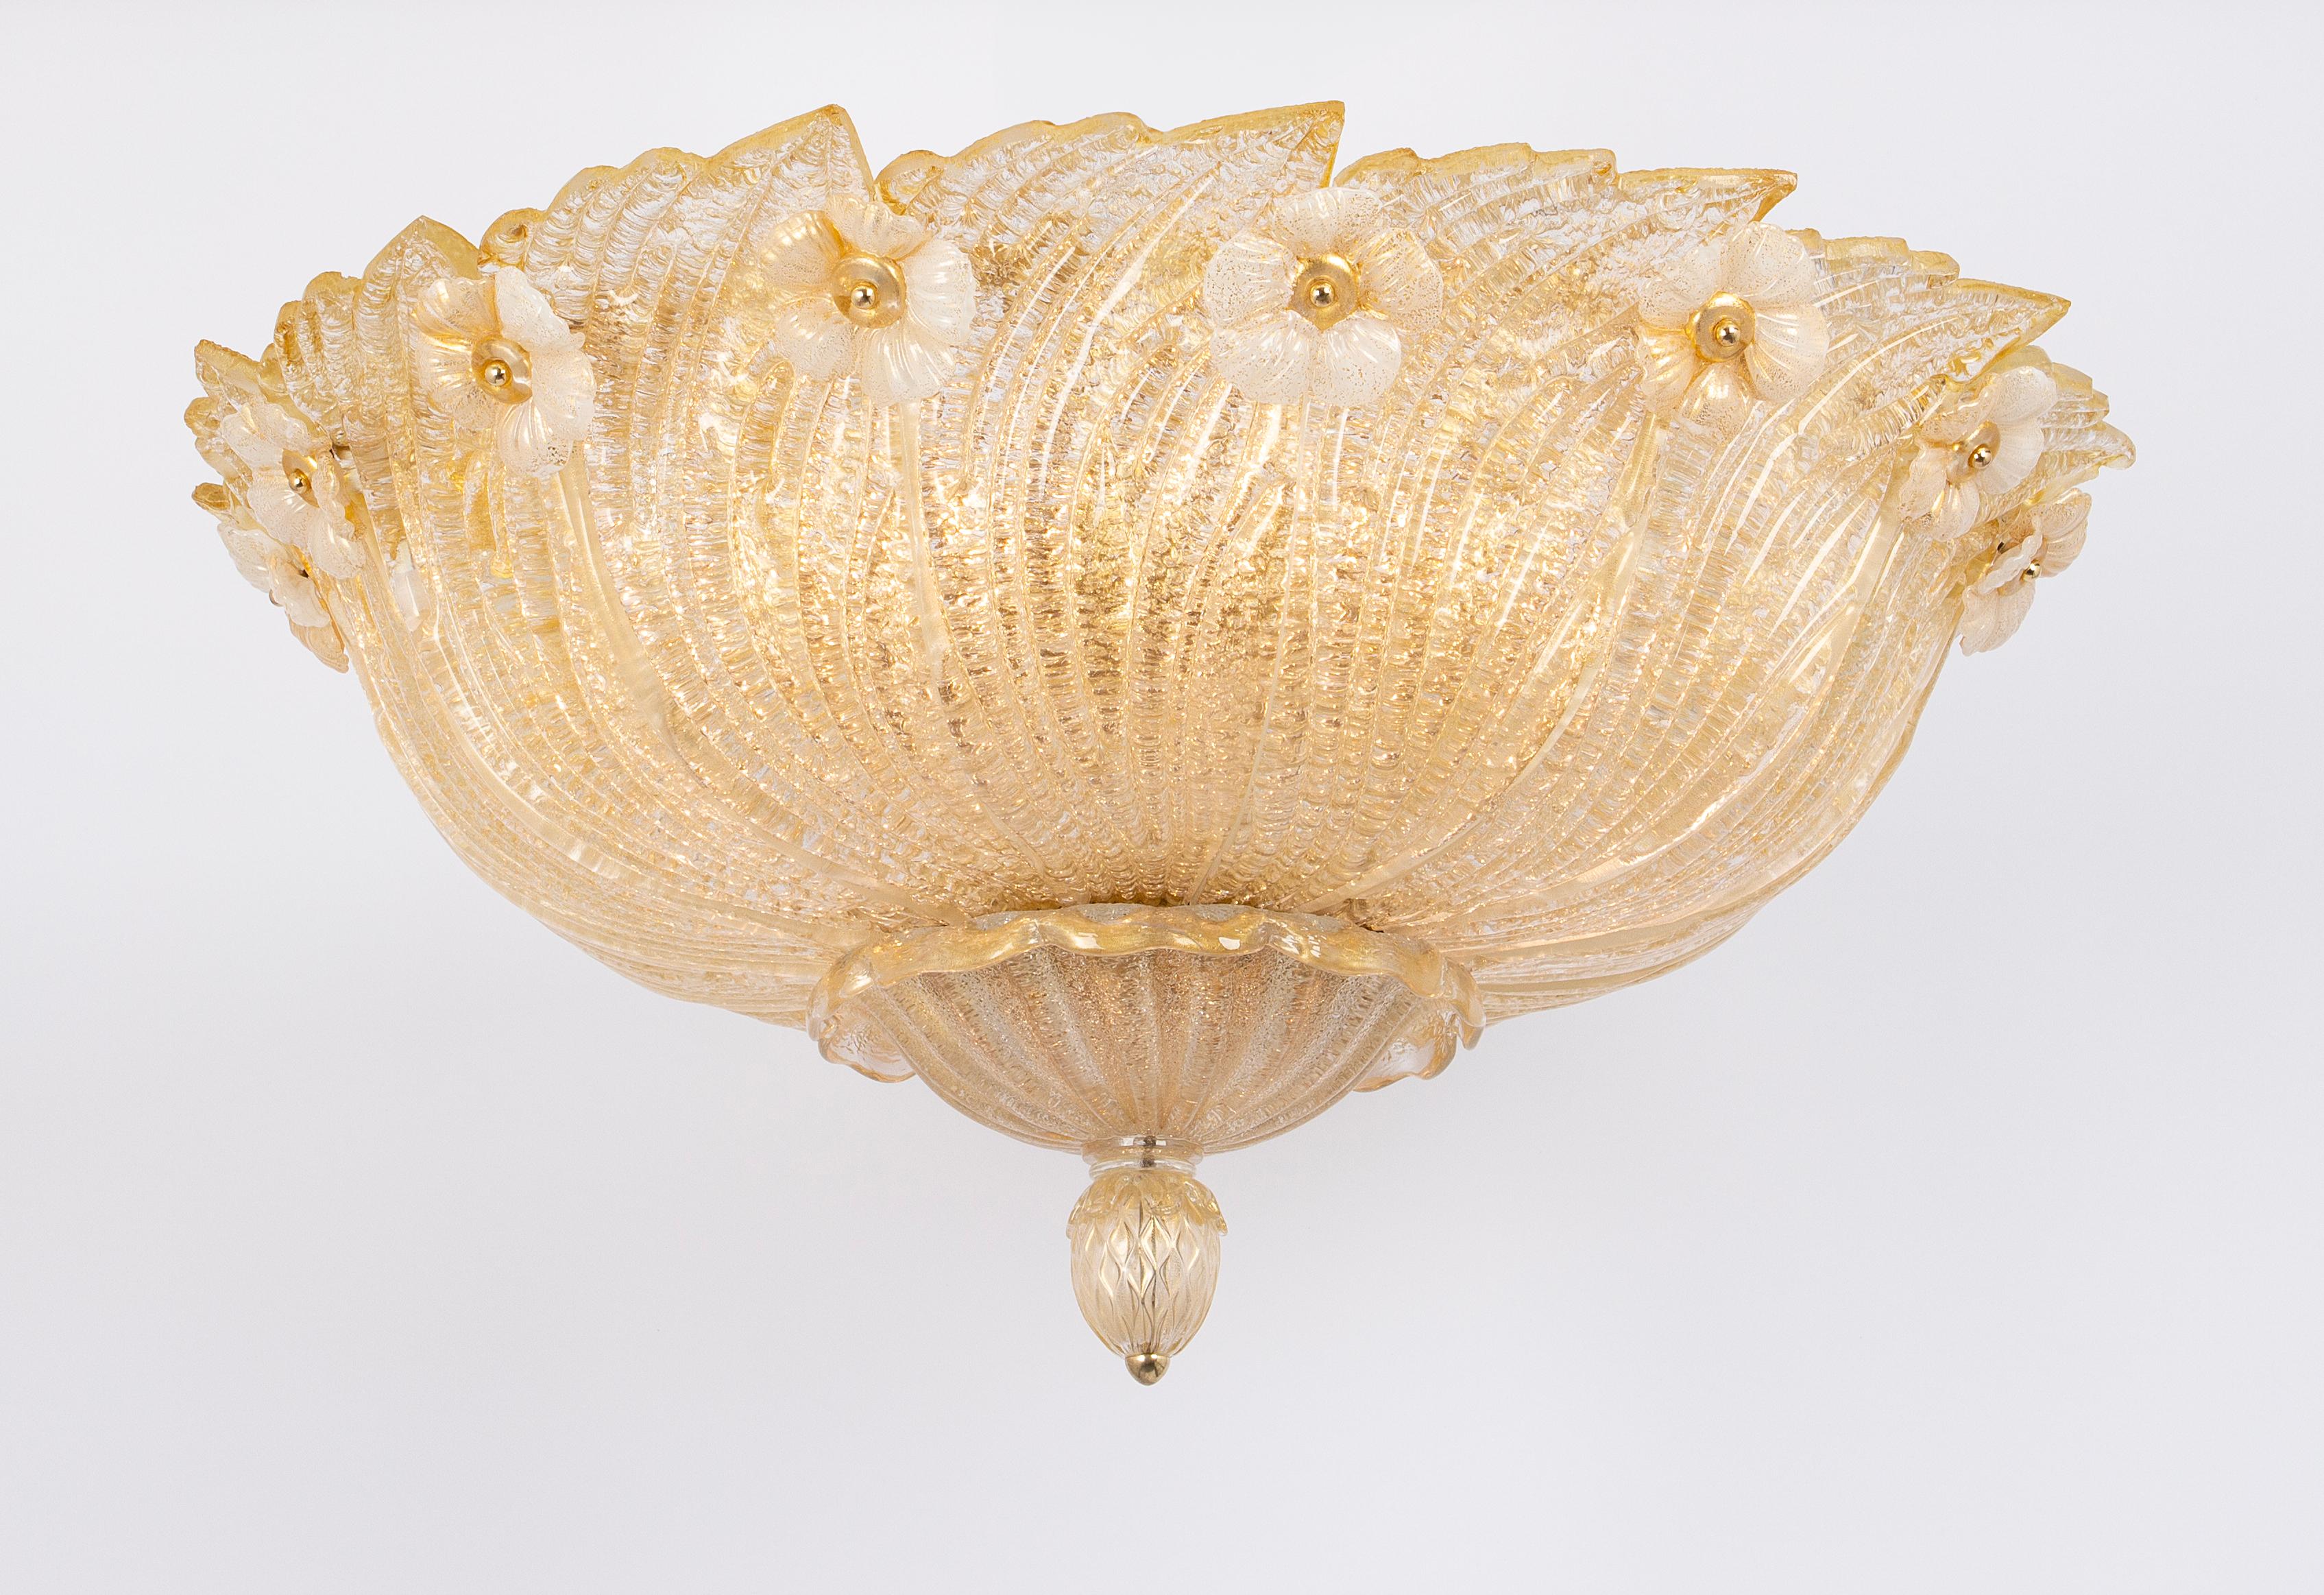 1 of 2 Large Grand Hotel Murano Ceiling Fixture by Barovier & Toso, Italy, 1970s For Sale 4